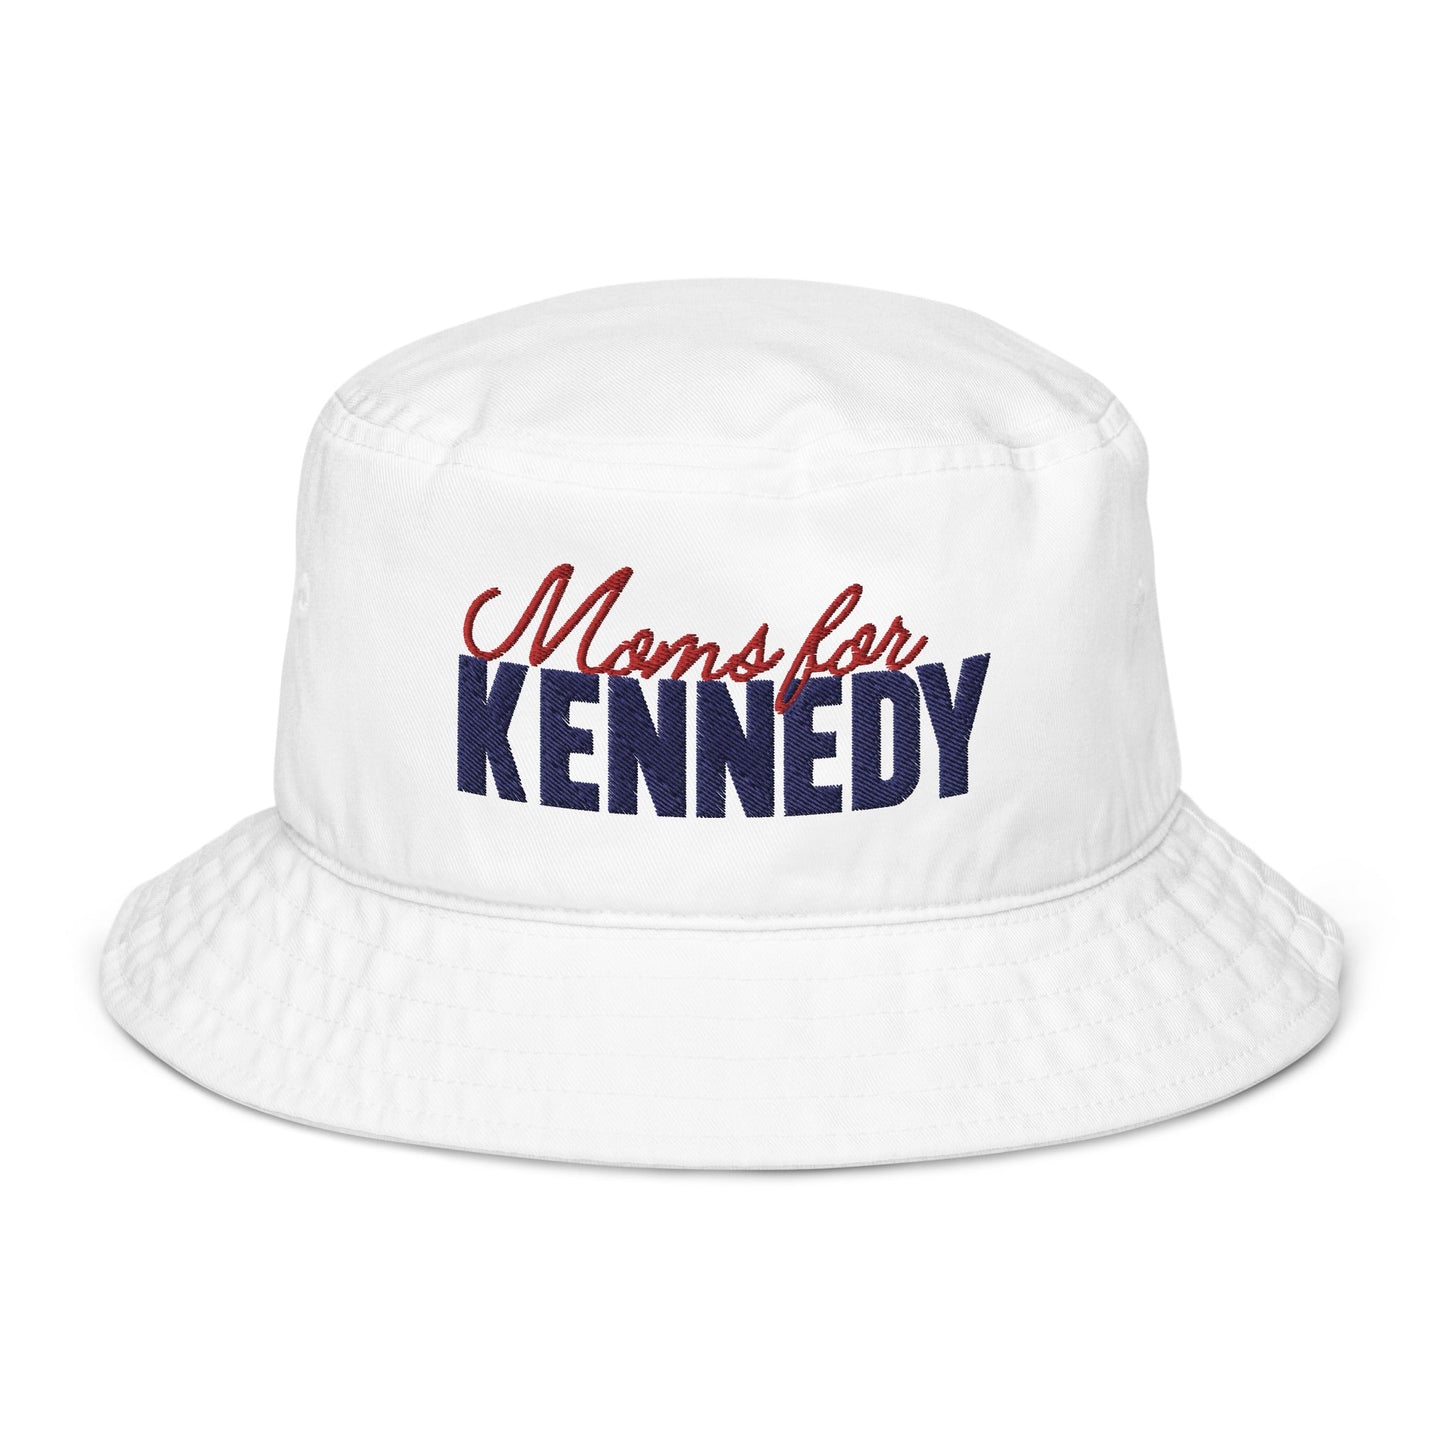 Moms for Kennedy Organic Bucket Hat - TEAM KENNEDY. All rights reserved